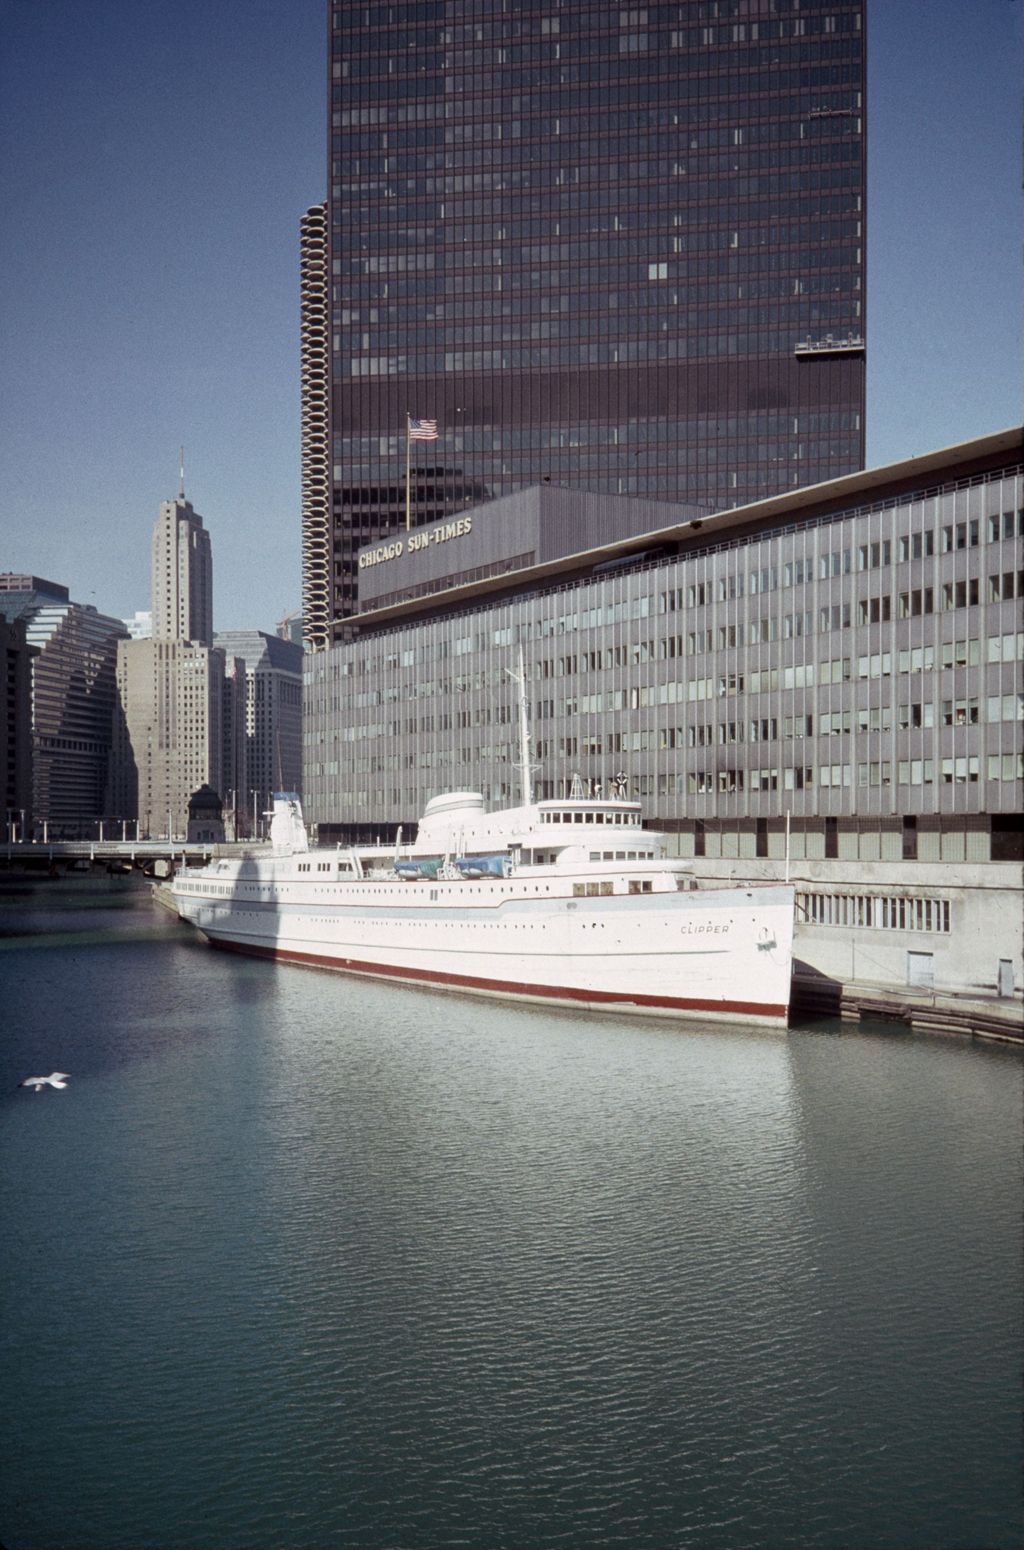 Chicago River and Sun-Times Building